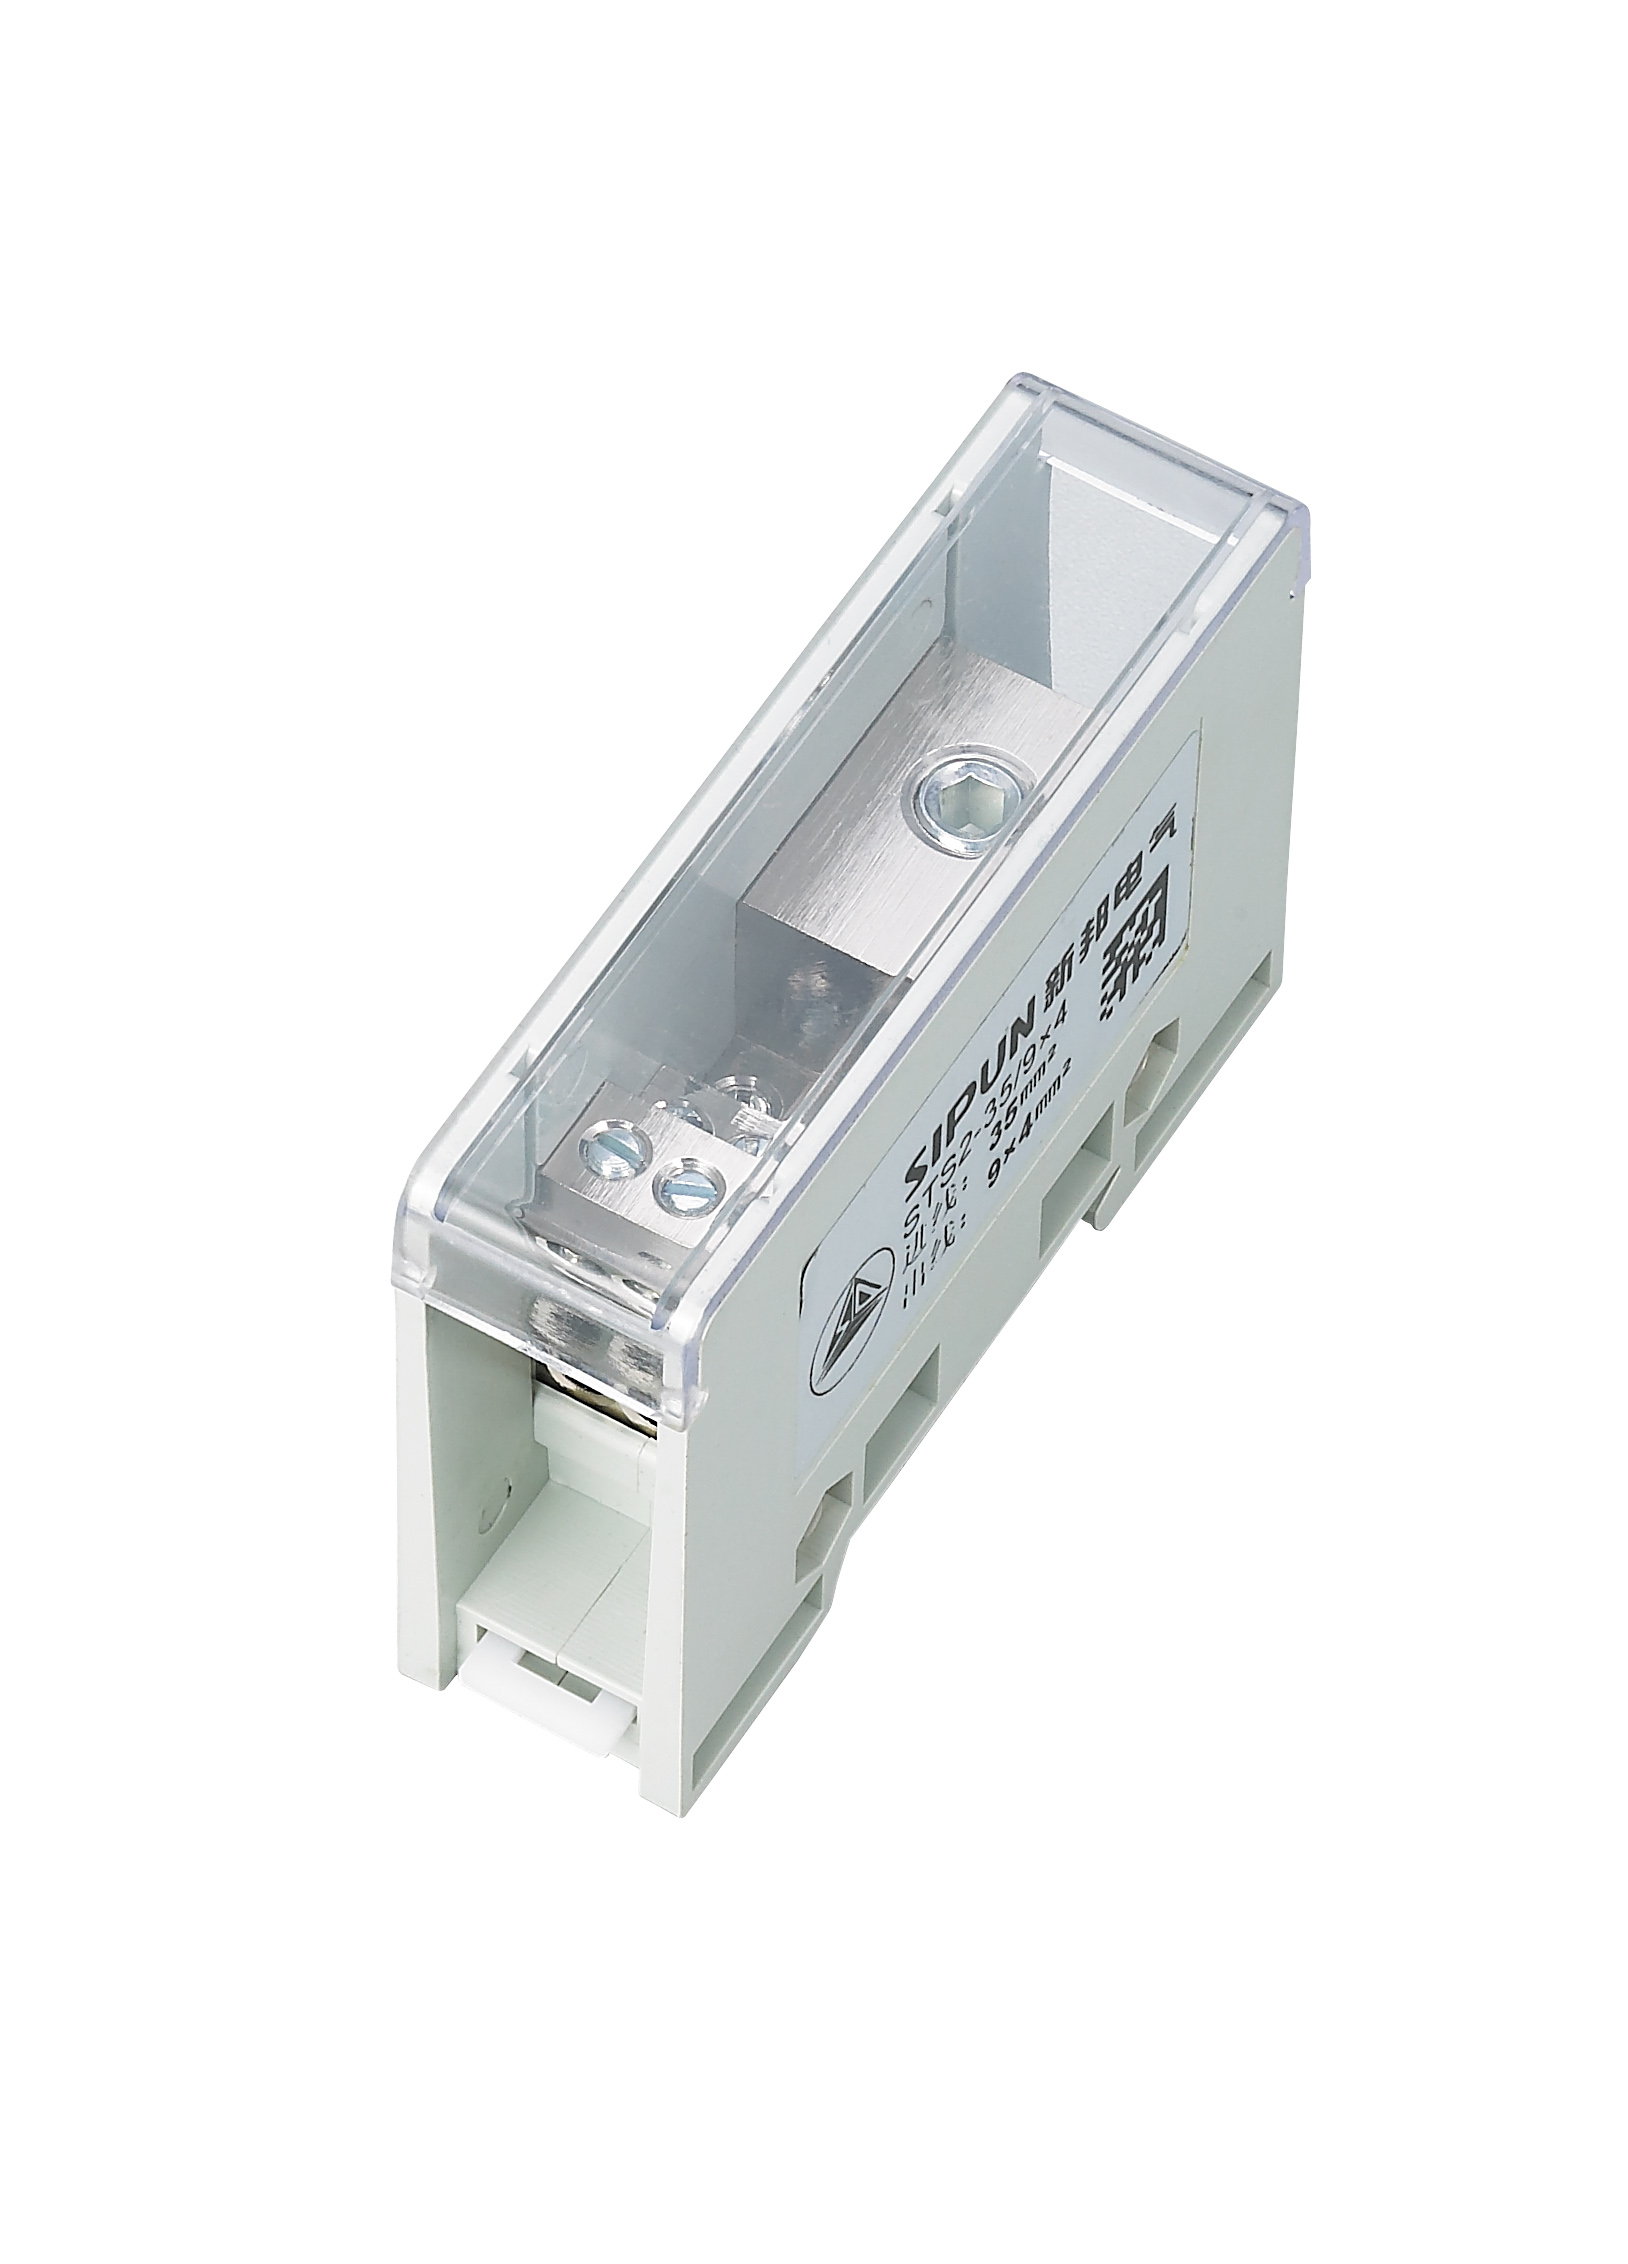 Introducing the SIPUN Company’s STS2 Series Terminal Blocks